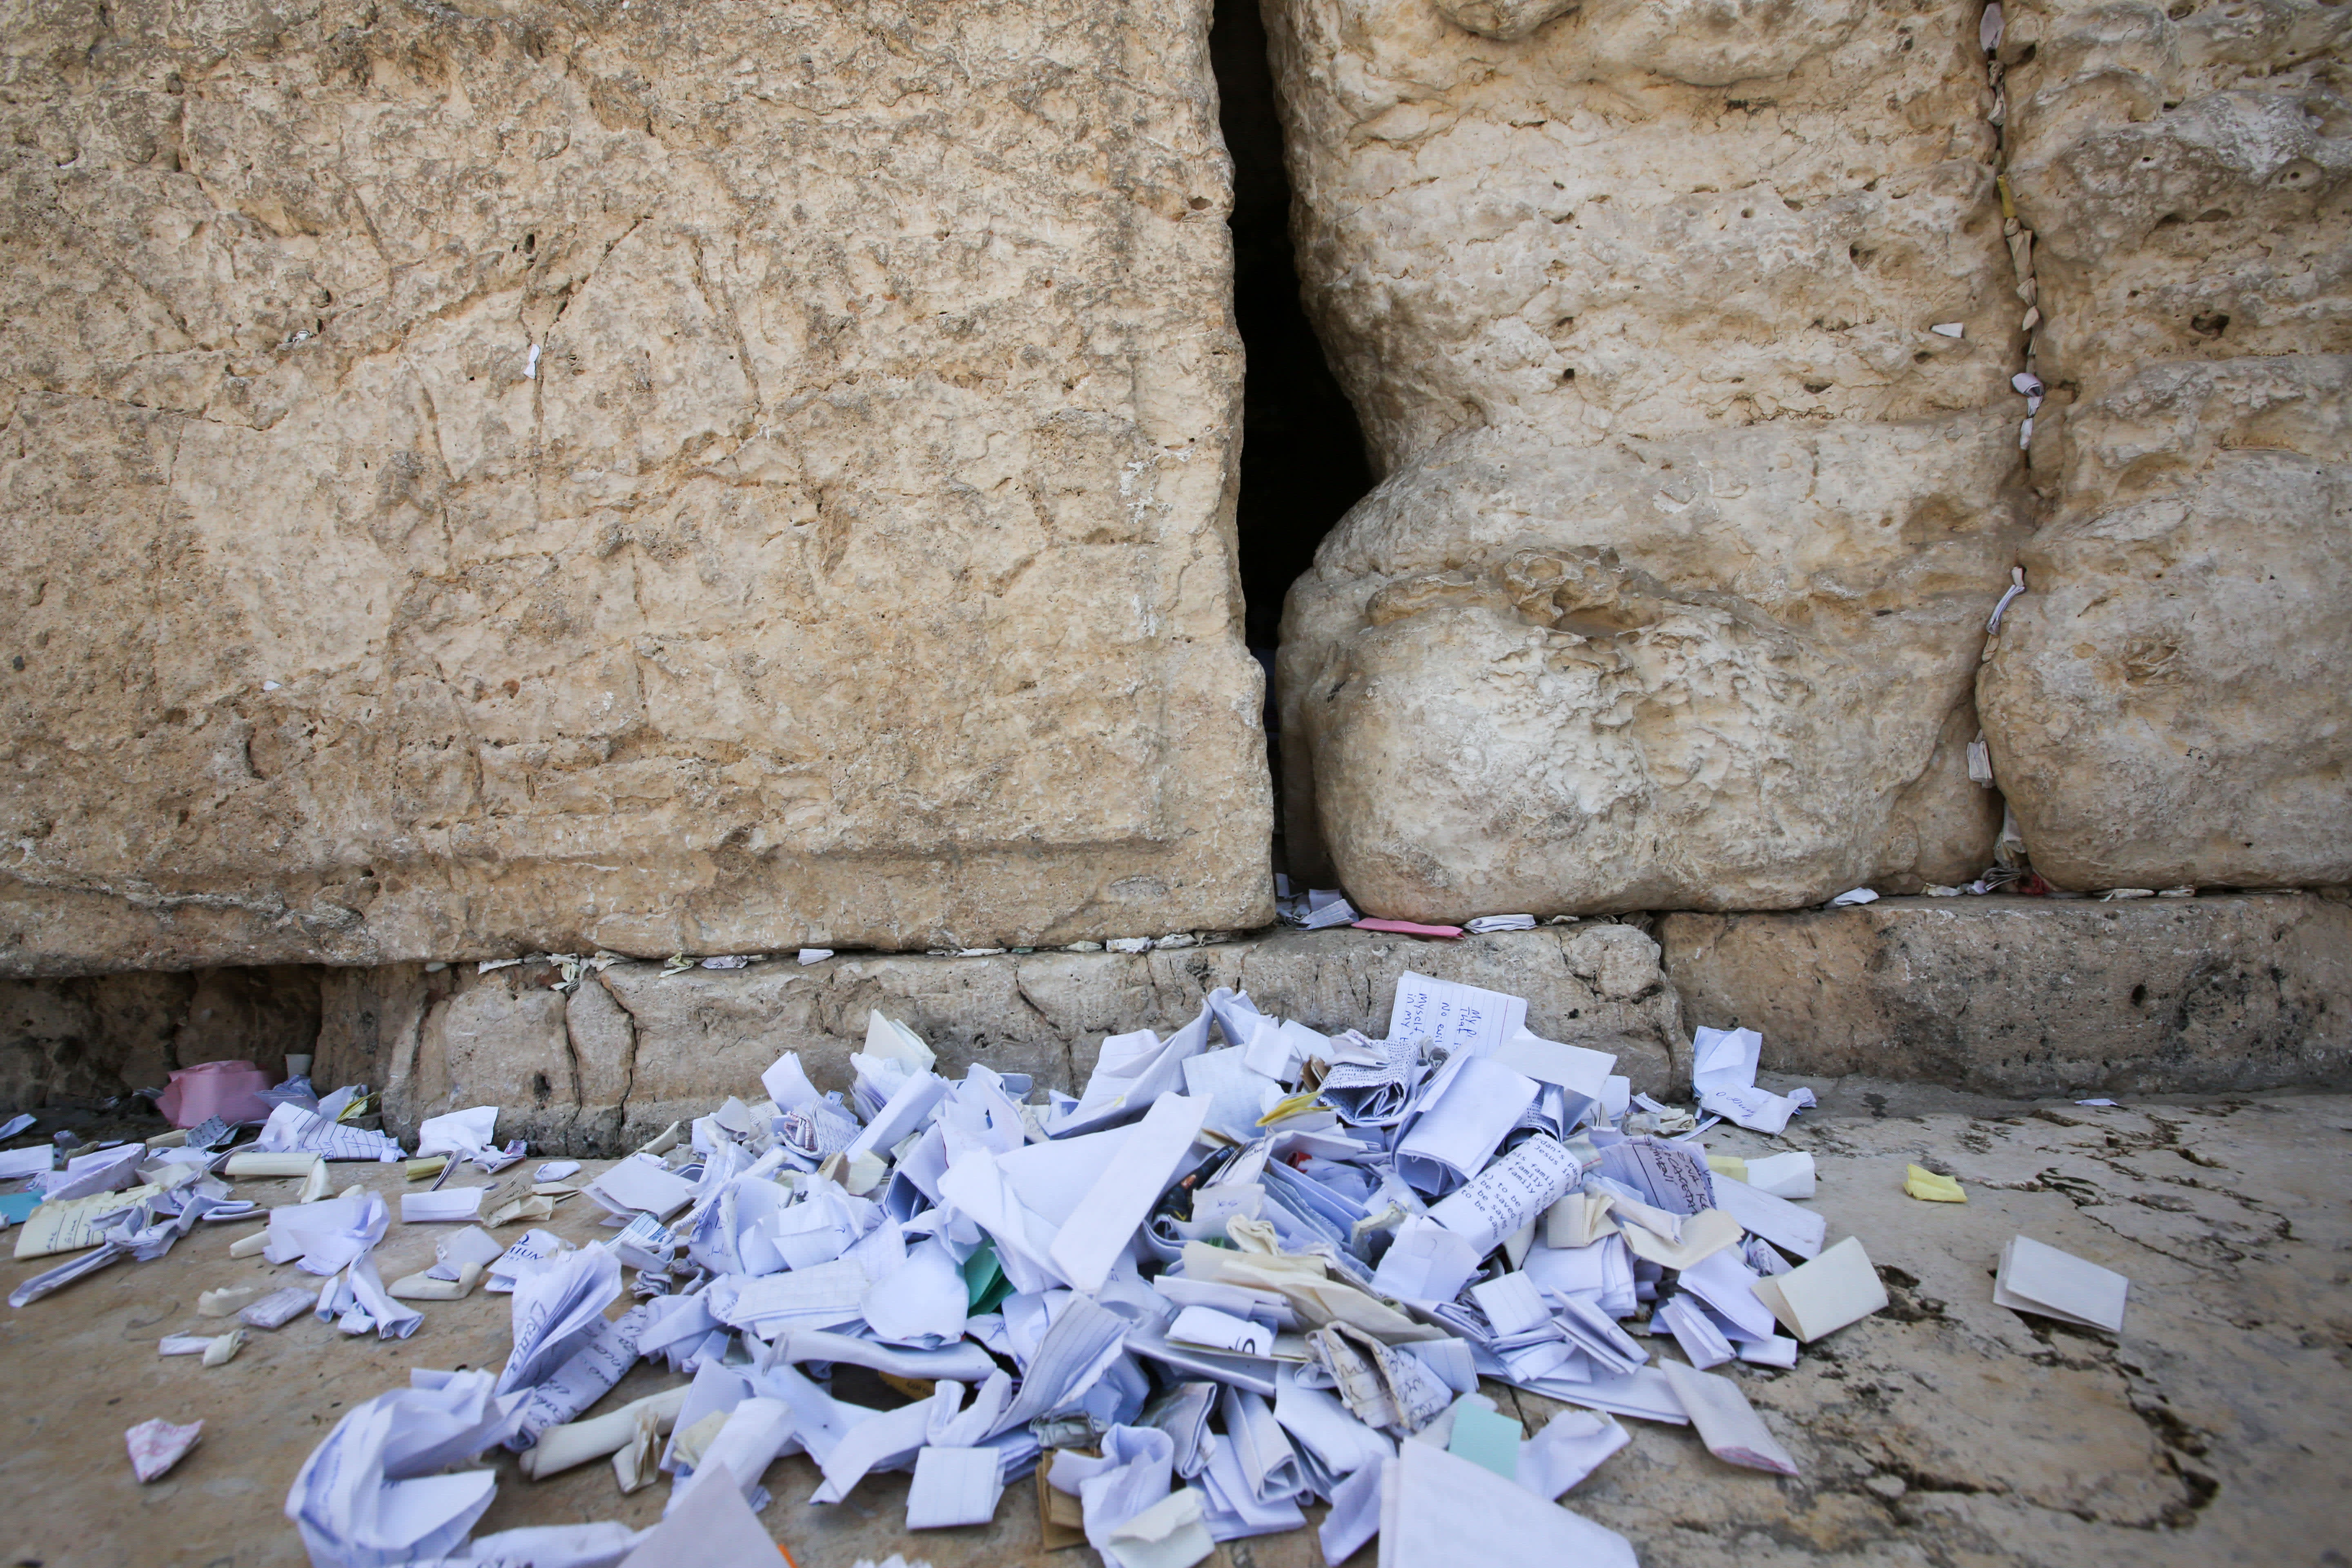 Western Wall notes on the ground after cleaning